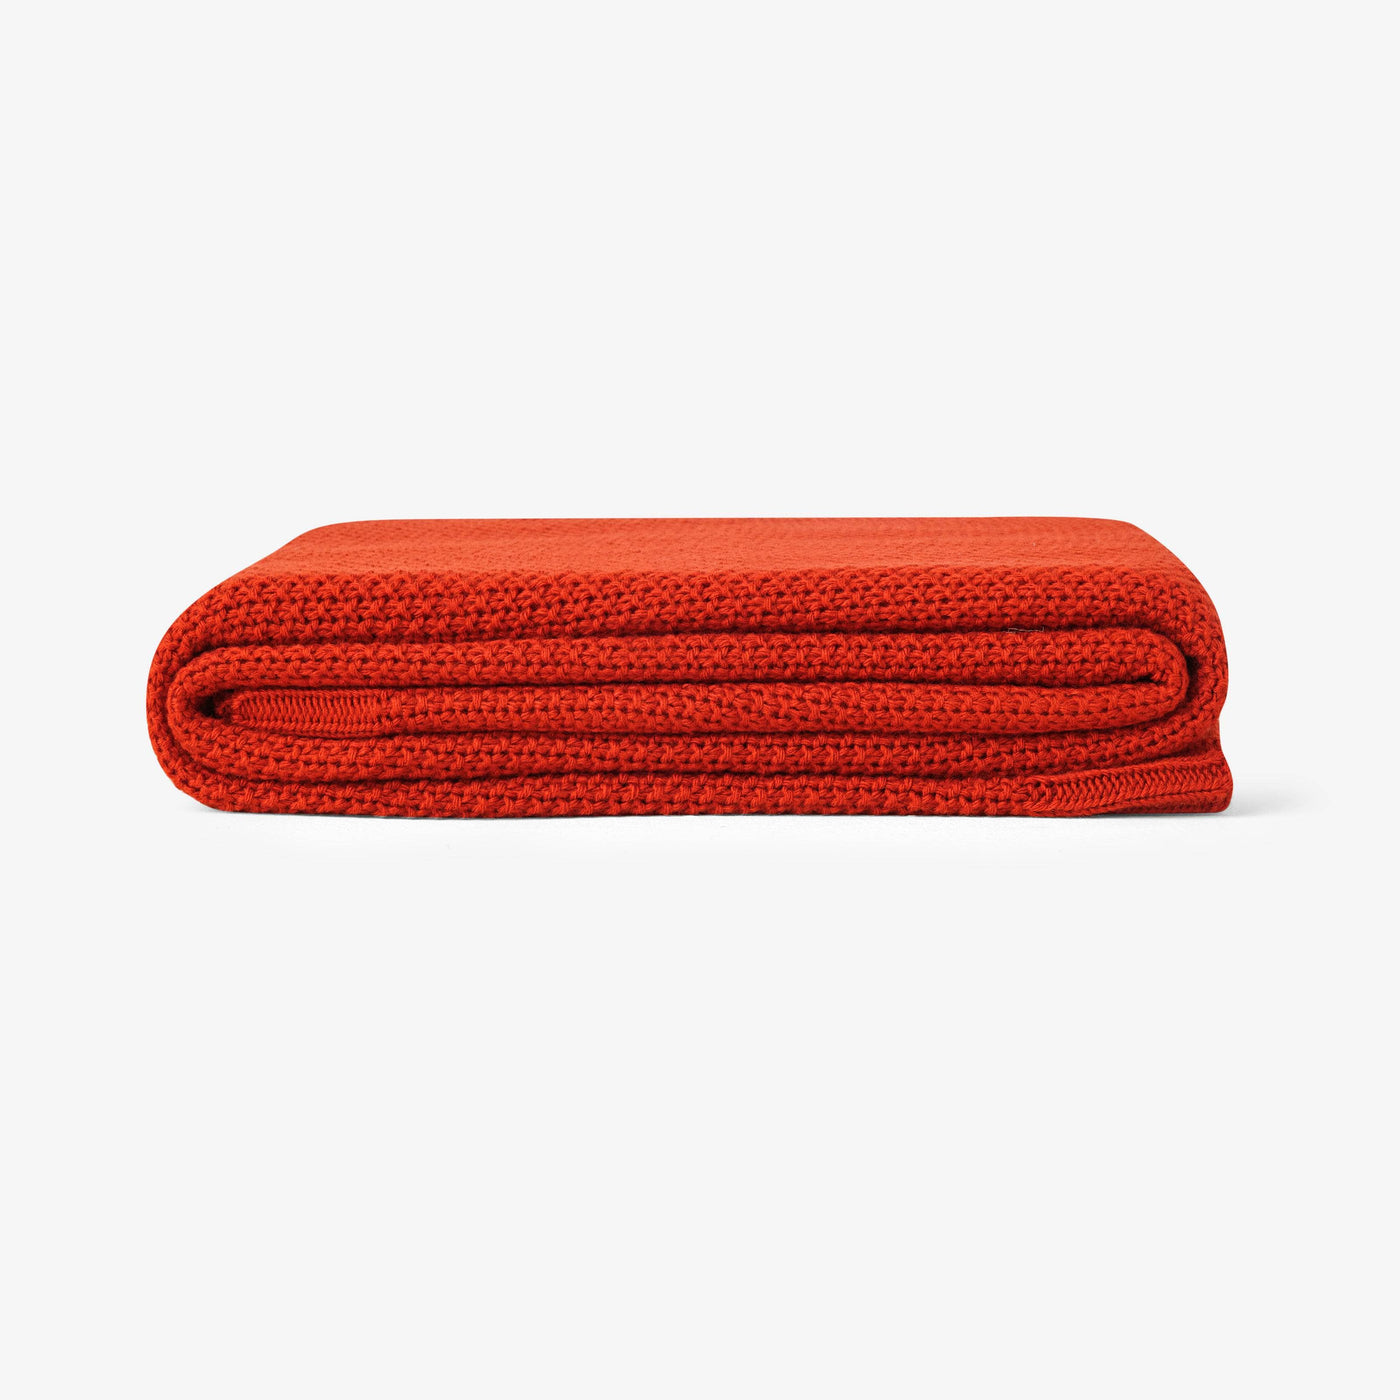 Benjamin Waffle Fringed Knitted Throw, Red, 125x160 cm Throws sazy.com